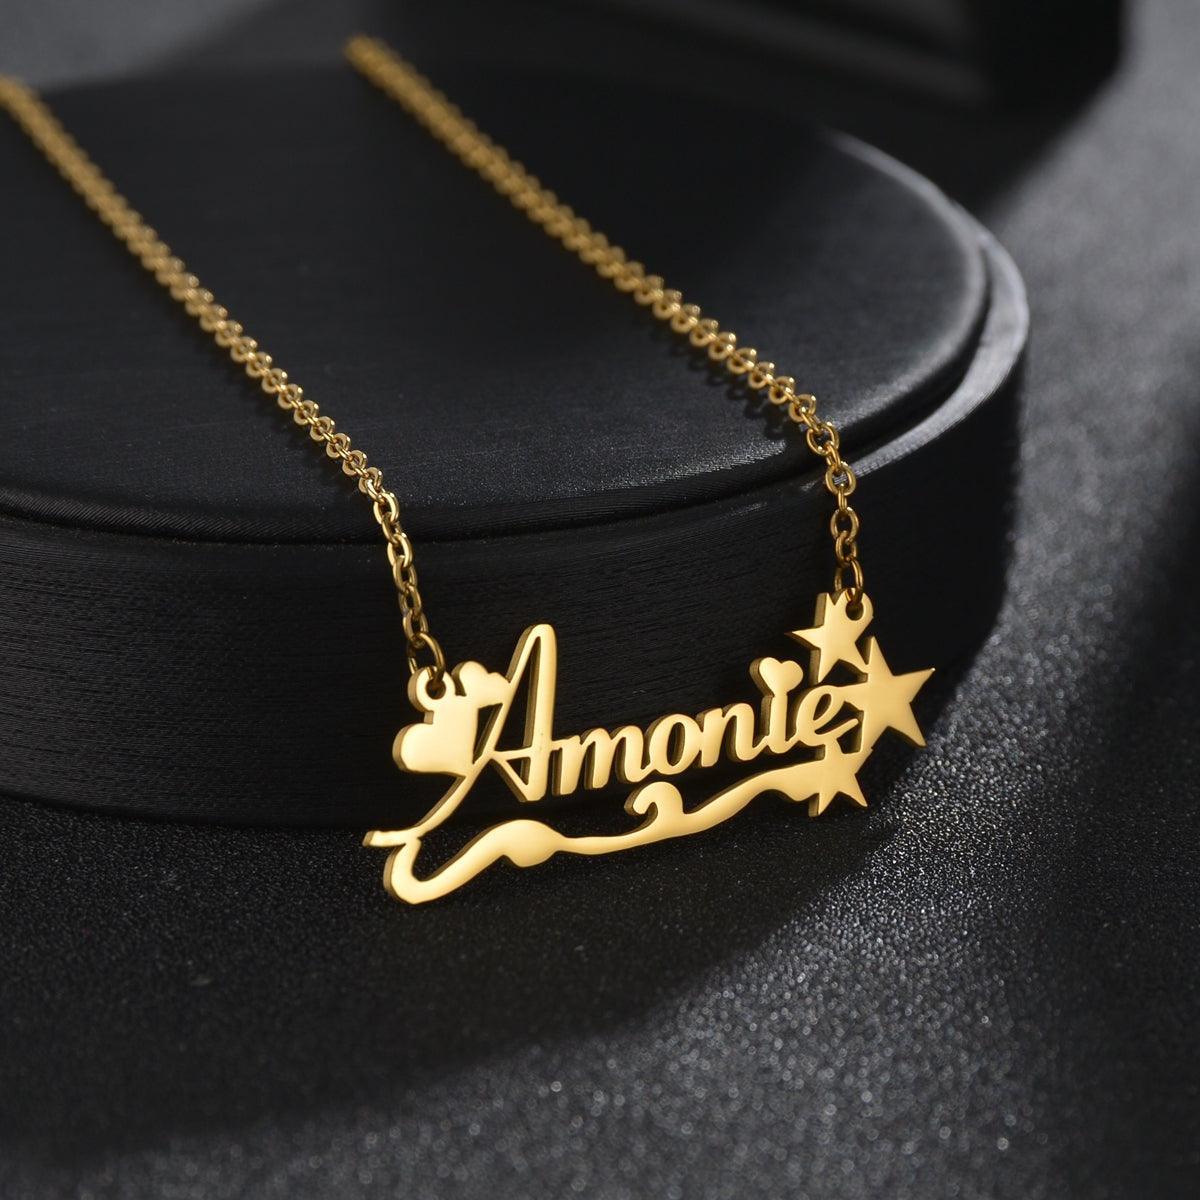 Personalized Custom Name Necklaces For Her in 2023 | Personalized Custom Name Necklaces For Her - undefined | Custom Name Necklace Personalized Necklace, Personalized Custom Diamond Necklaces, Personalized Custom Heart-shaped Letter Necklace, Personalized Frosted Custom Necklace | From Hunny Life | hunnylife.com